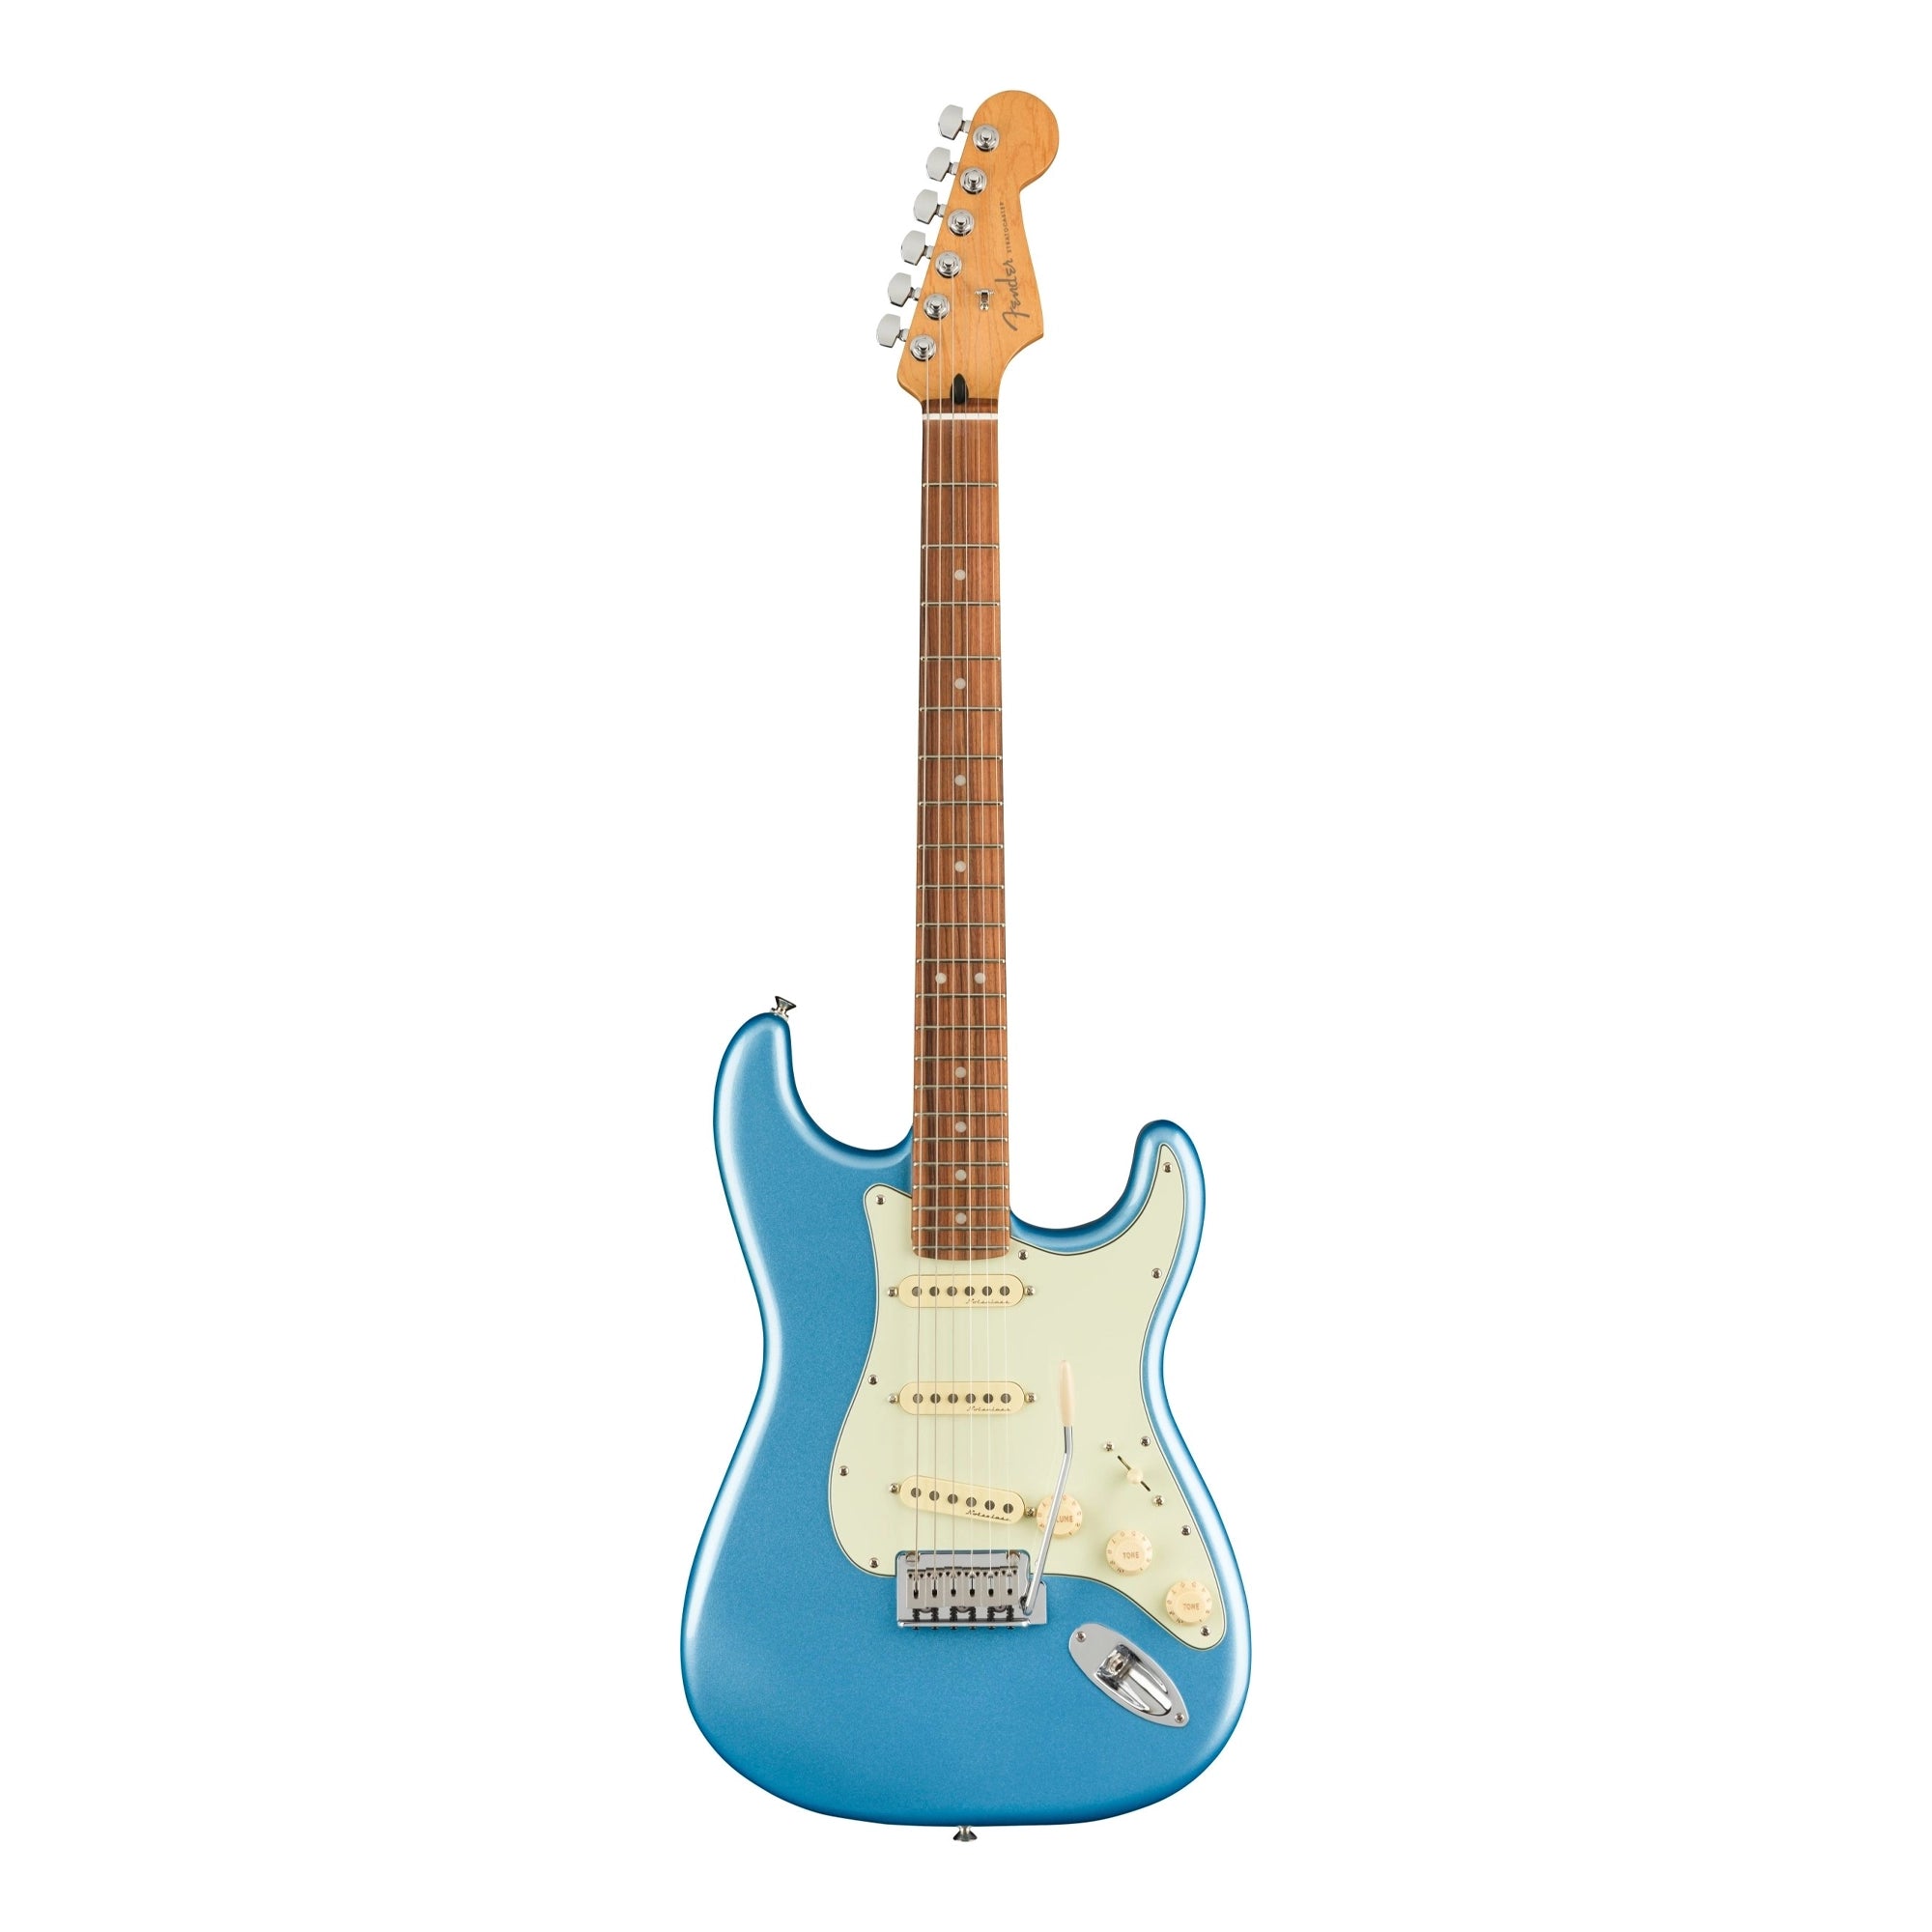 Fender Player Plus Stratocaster Electric Guitar - Opal Spark